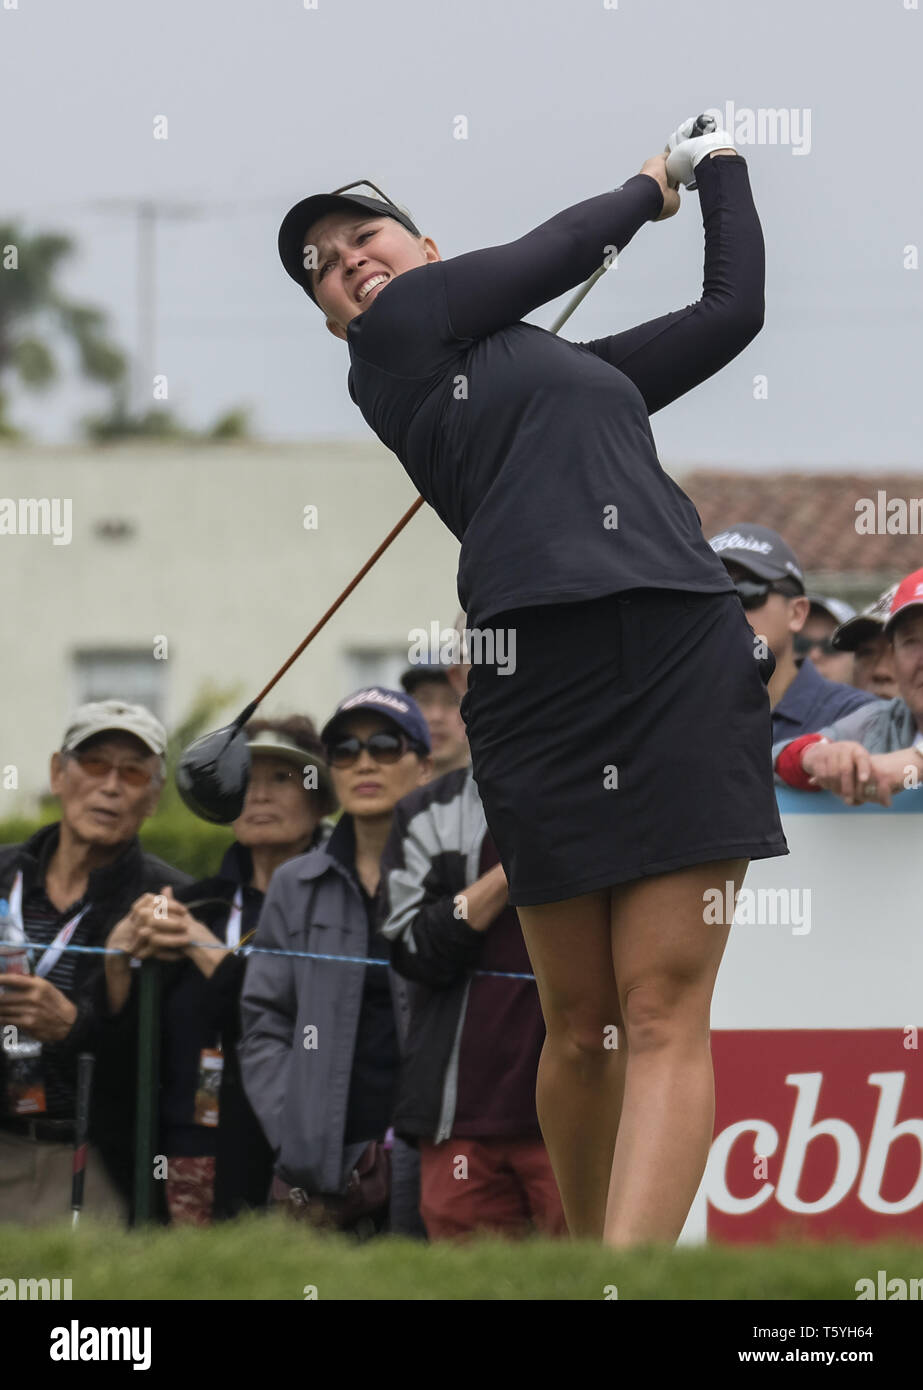 Los Angeles, California, USA. 27th Apr, 2019. Nanna Koerstz Madsen of Denmark in actions during the third round of the HUGEL-AIR PREMIA LA Open LPGA golf tournament at Wilshire Country on April 27, 2019, in Los Angeles. Credit: Ringo Chiu/ZUMA Wire/Alamy Live News Stock Photo